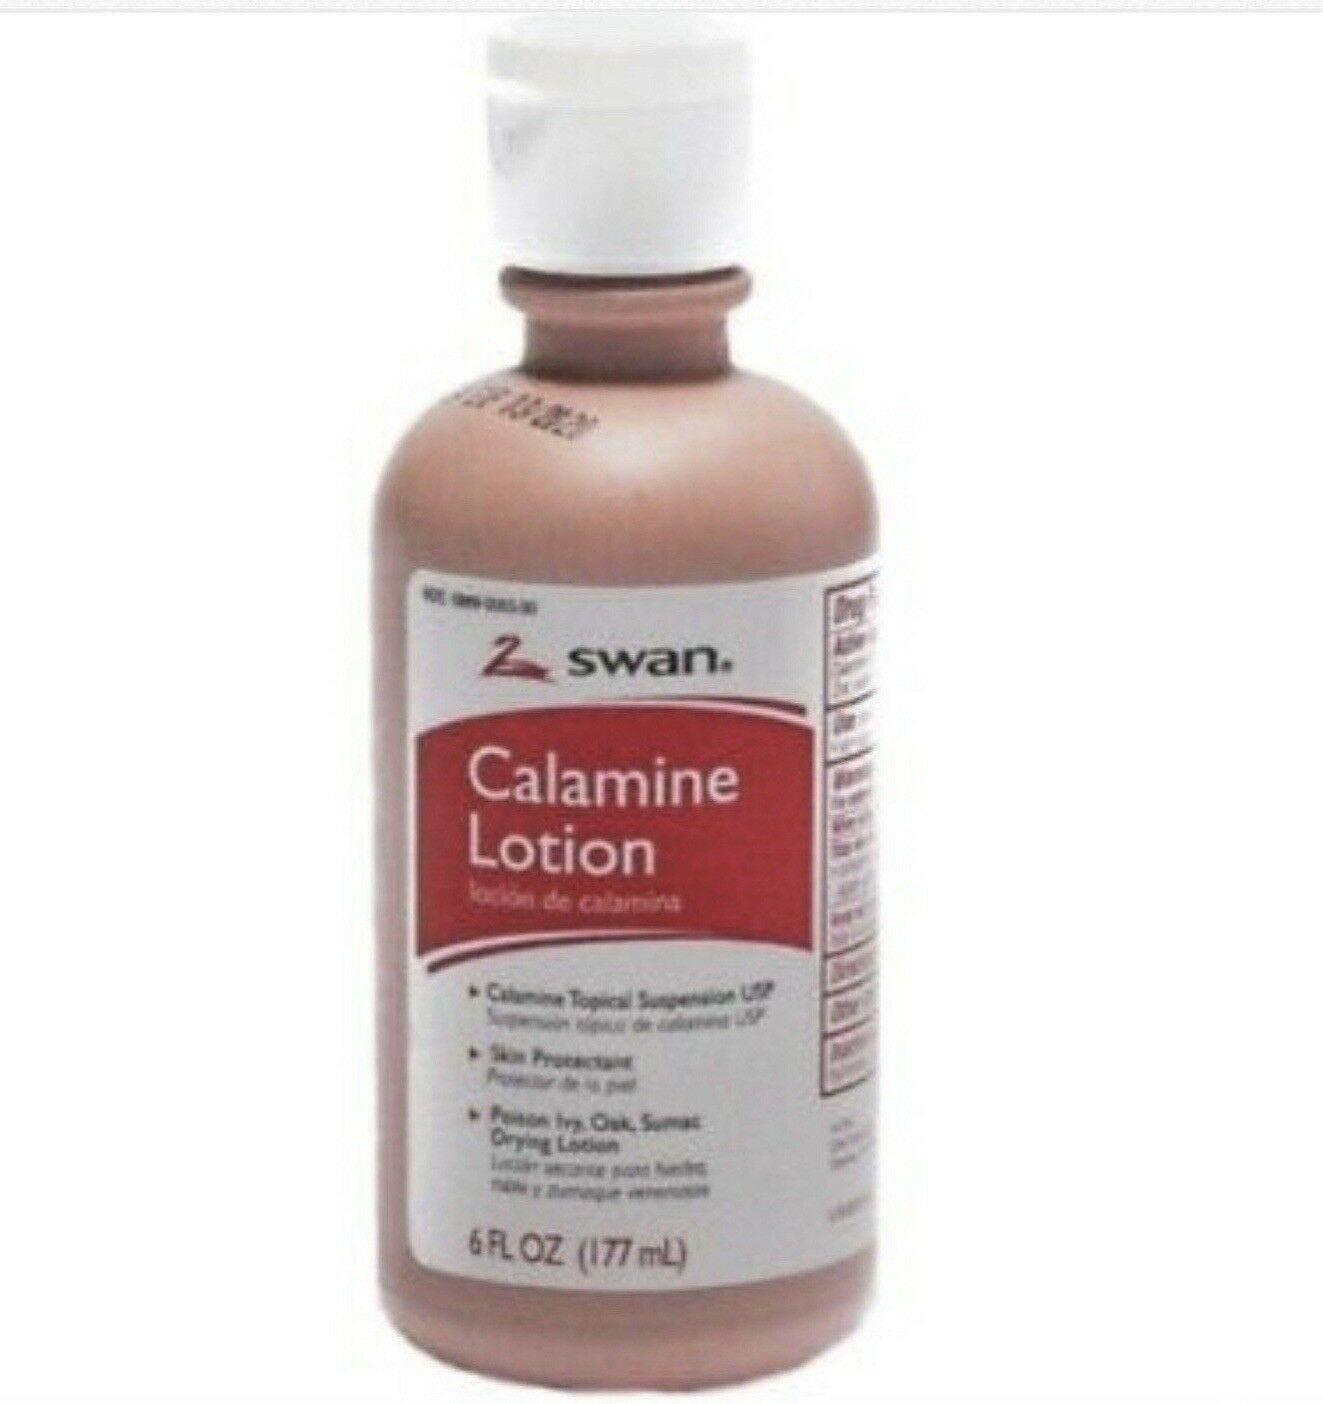 Calamine lotion for scalp psoriasis reviews